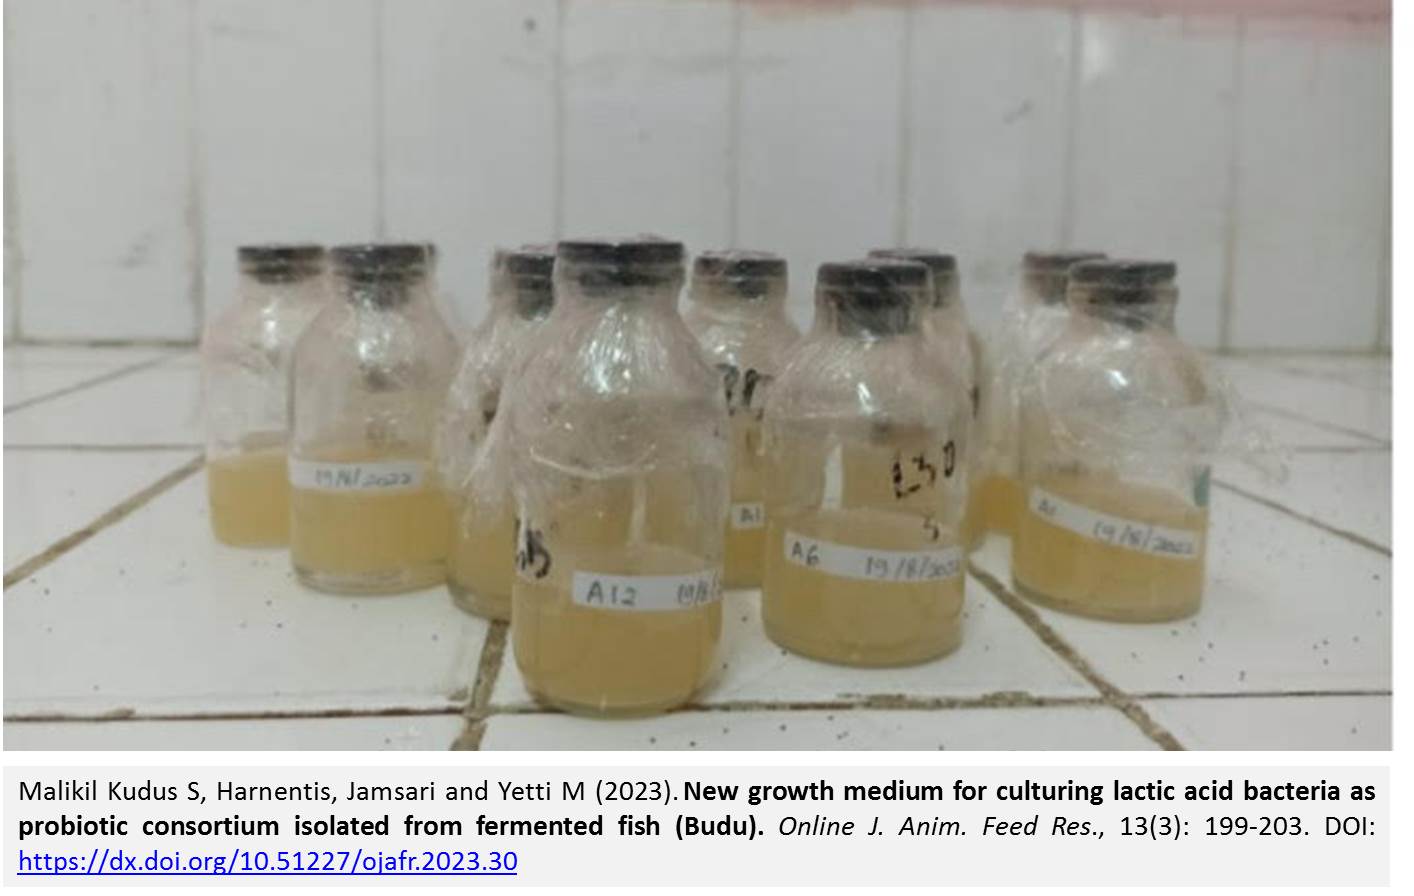 202-probiotic_consortium_isolated_from_fermented_fish_Budu